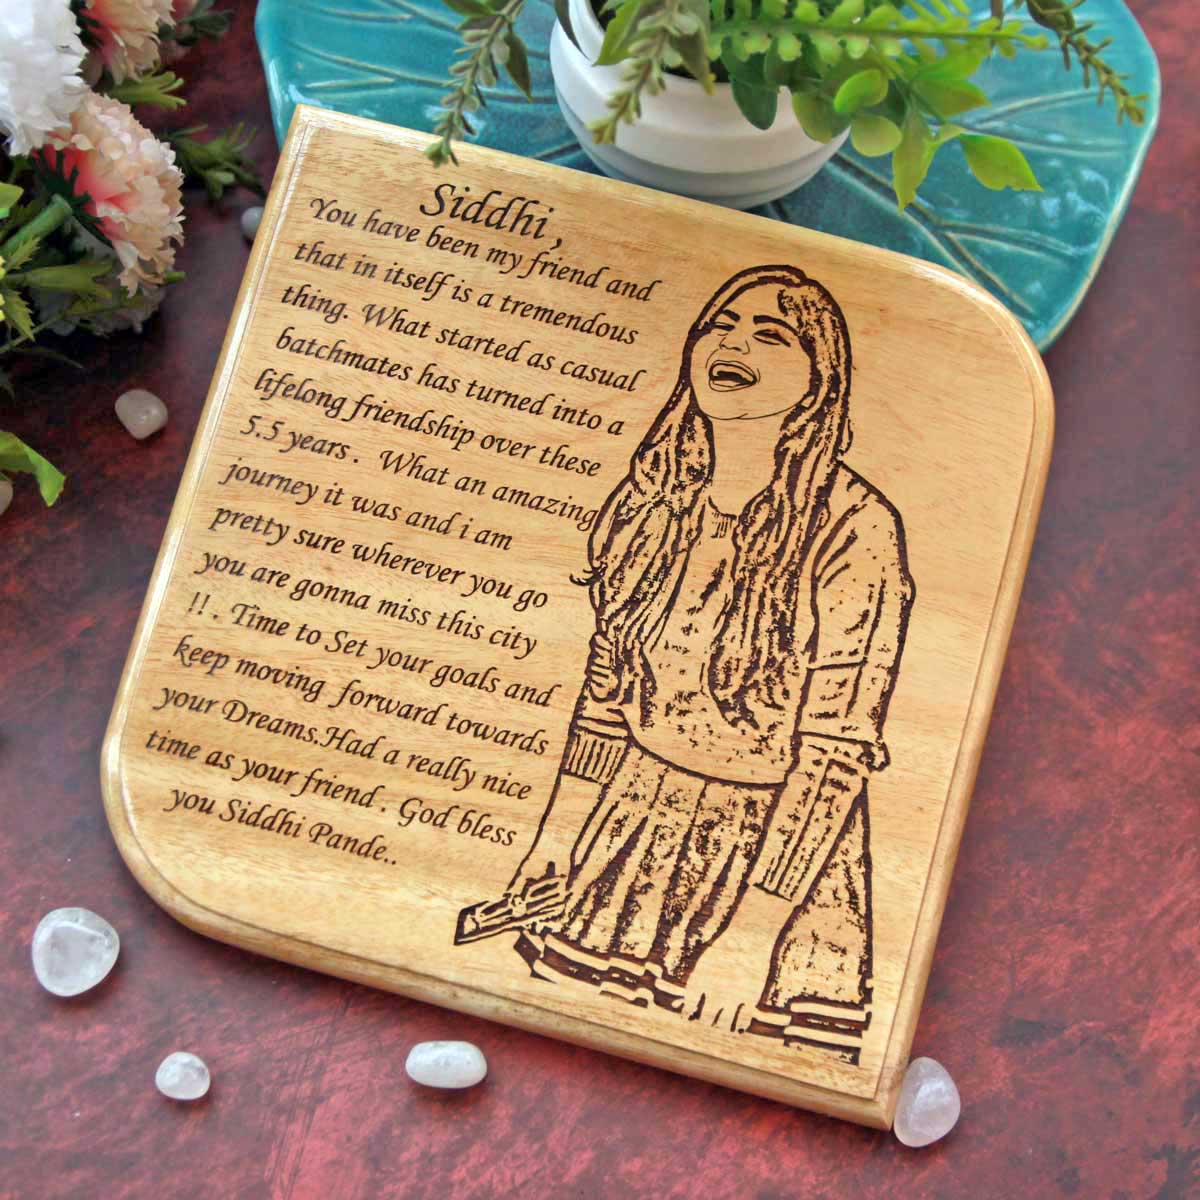 Engraved Wood Plaque For Friend's Birthday | Personalized Best Friend Gift